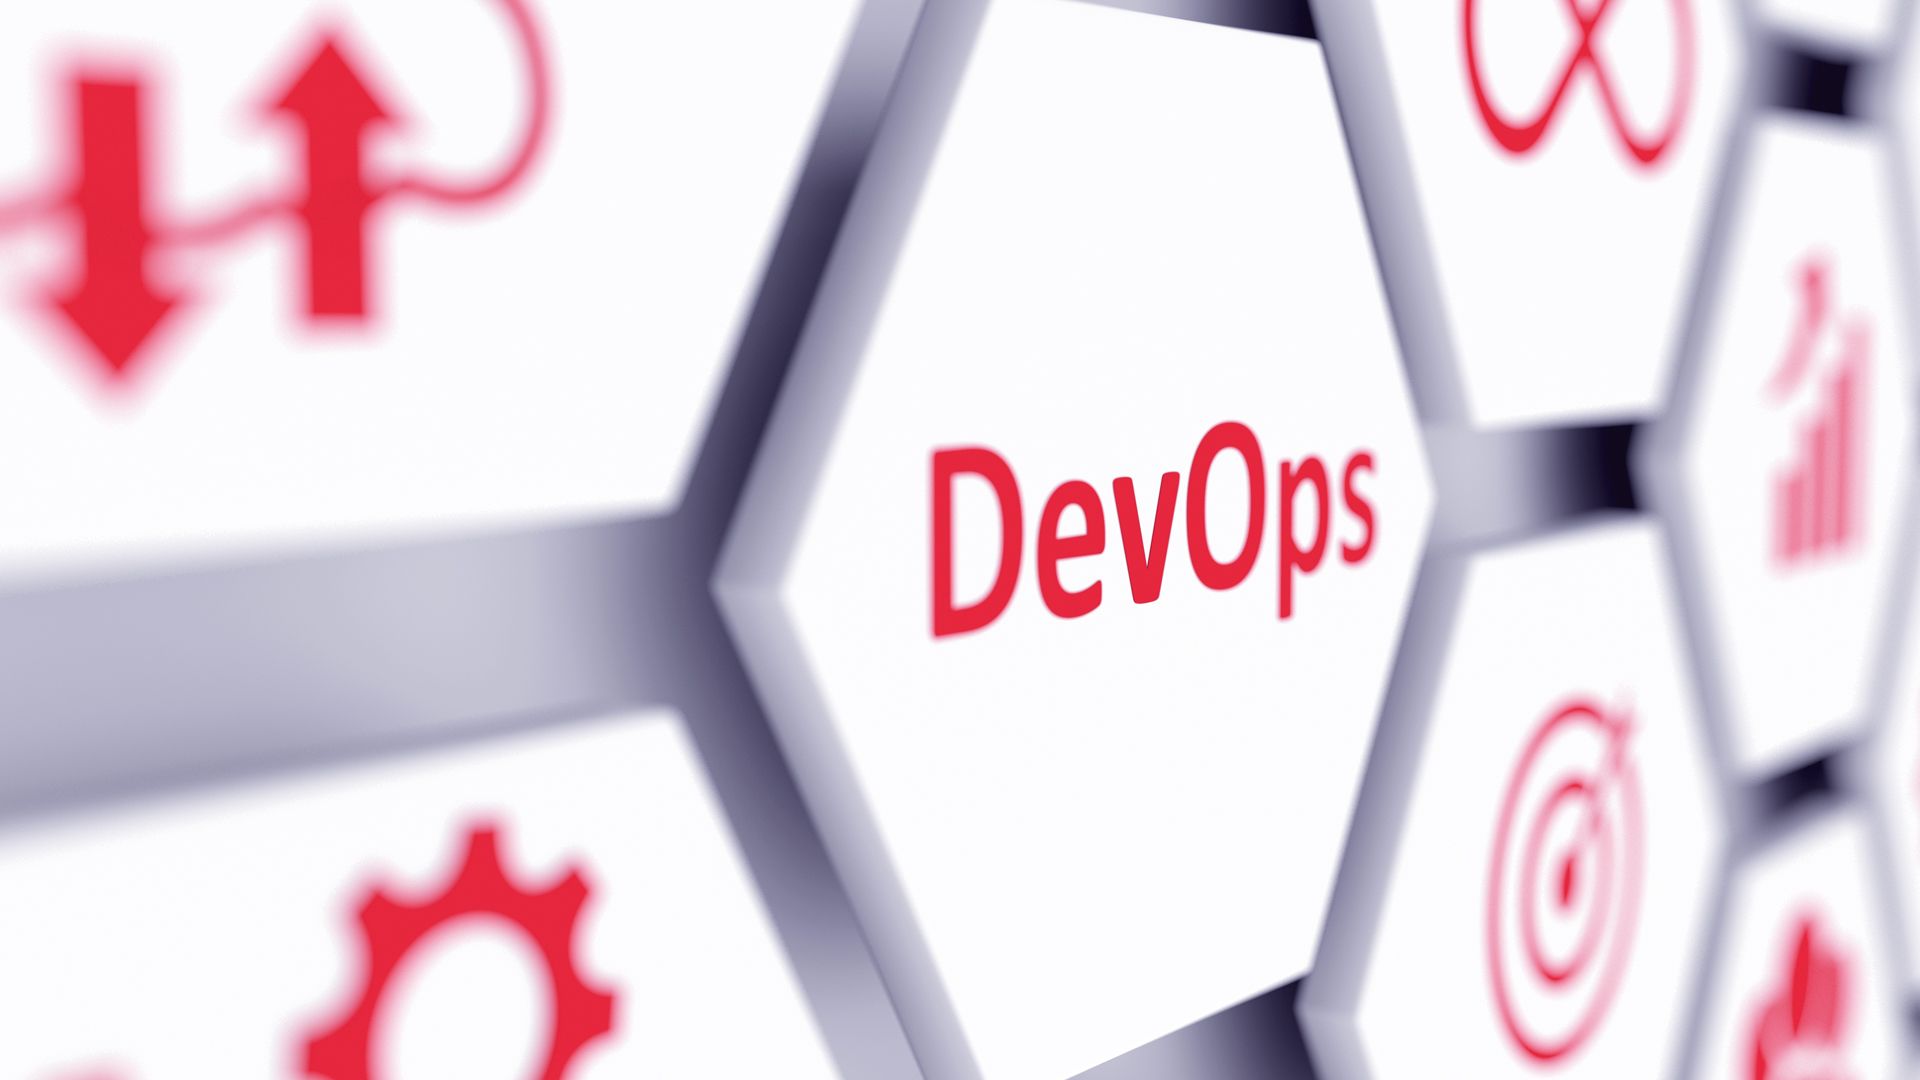 DevOps: What is it and why do you care?